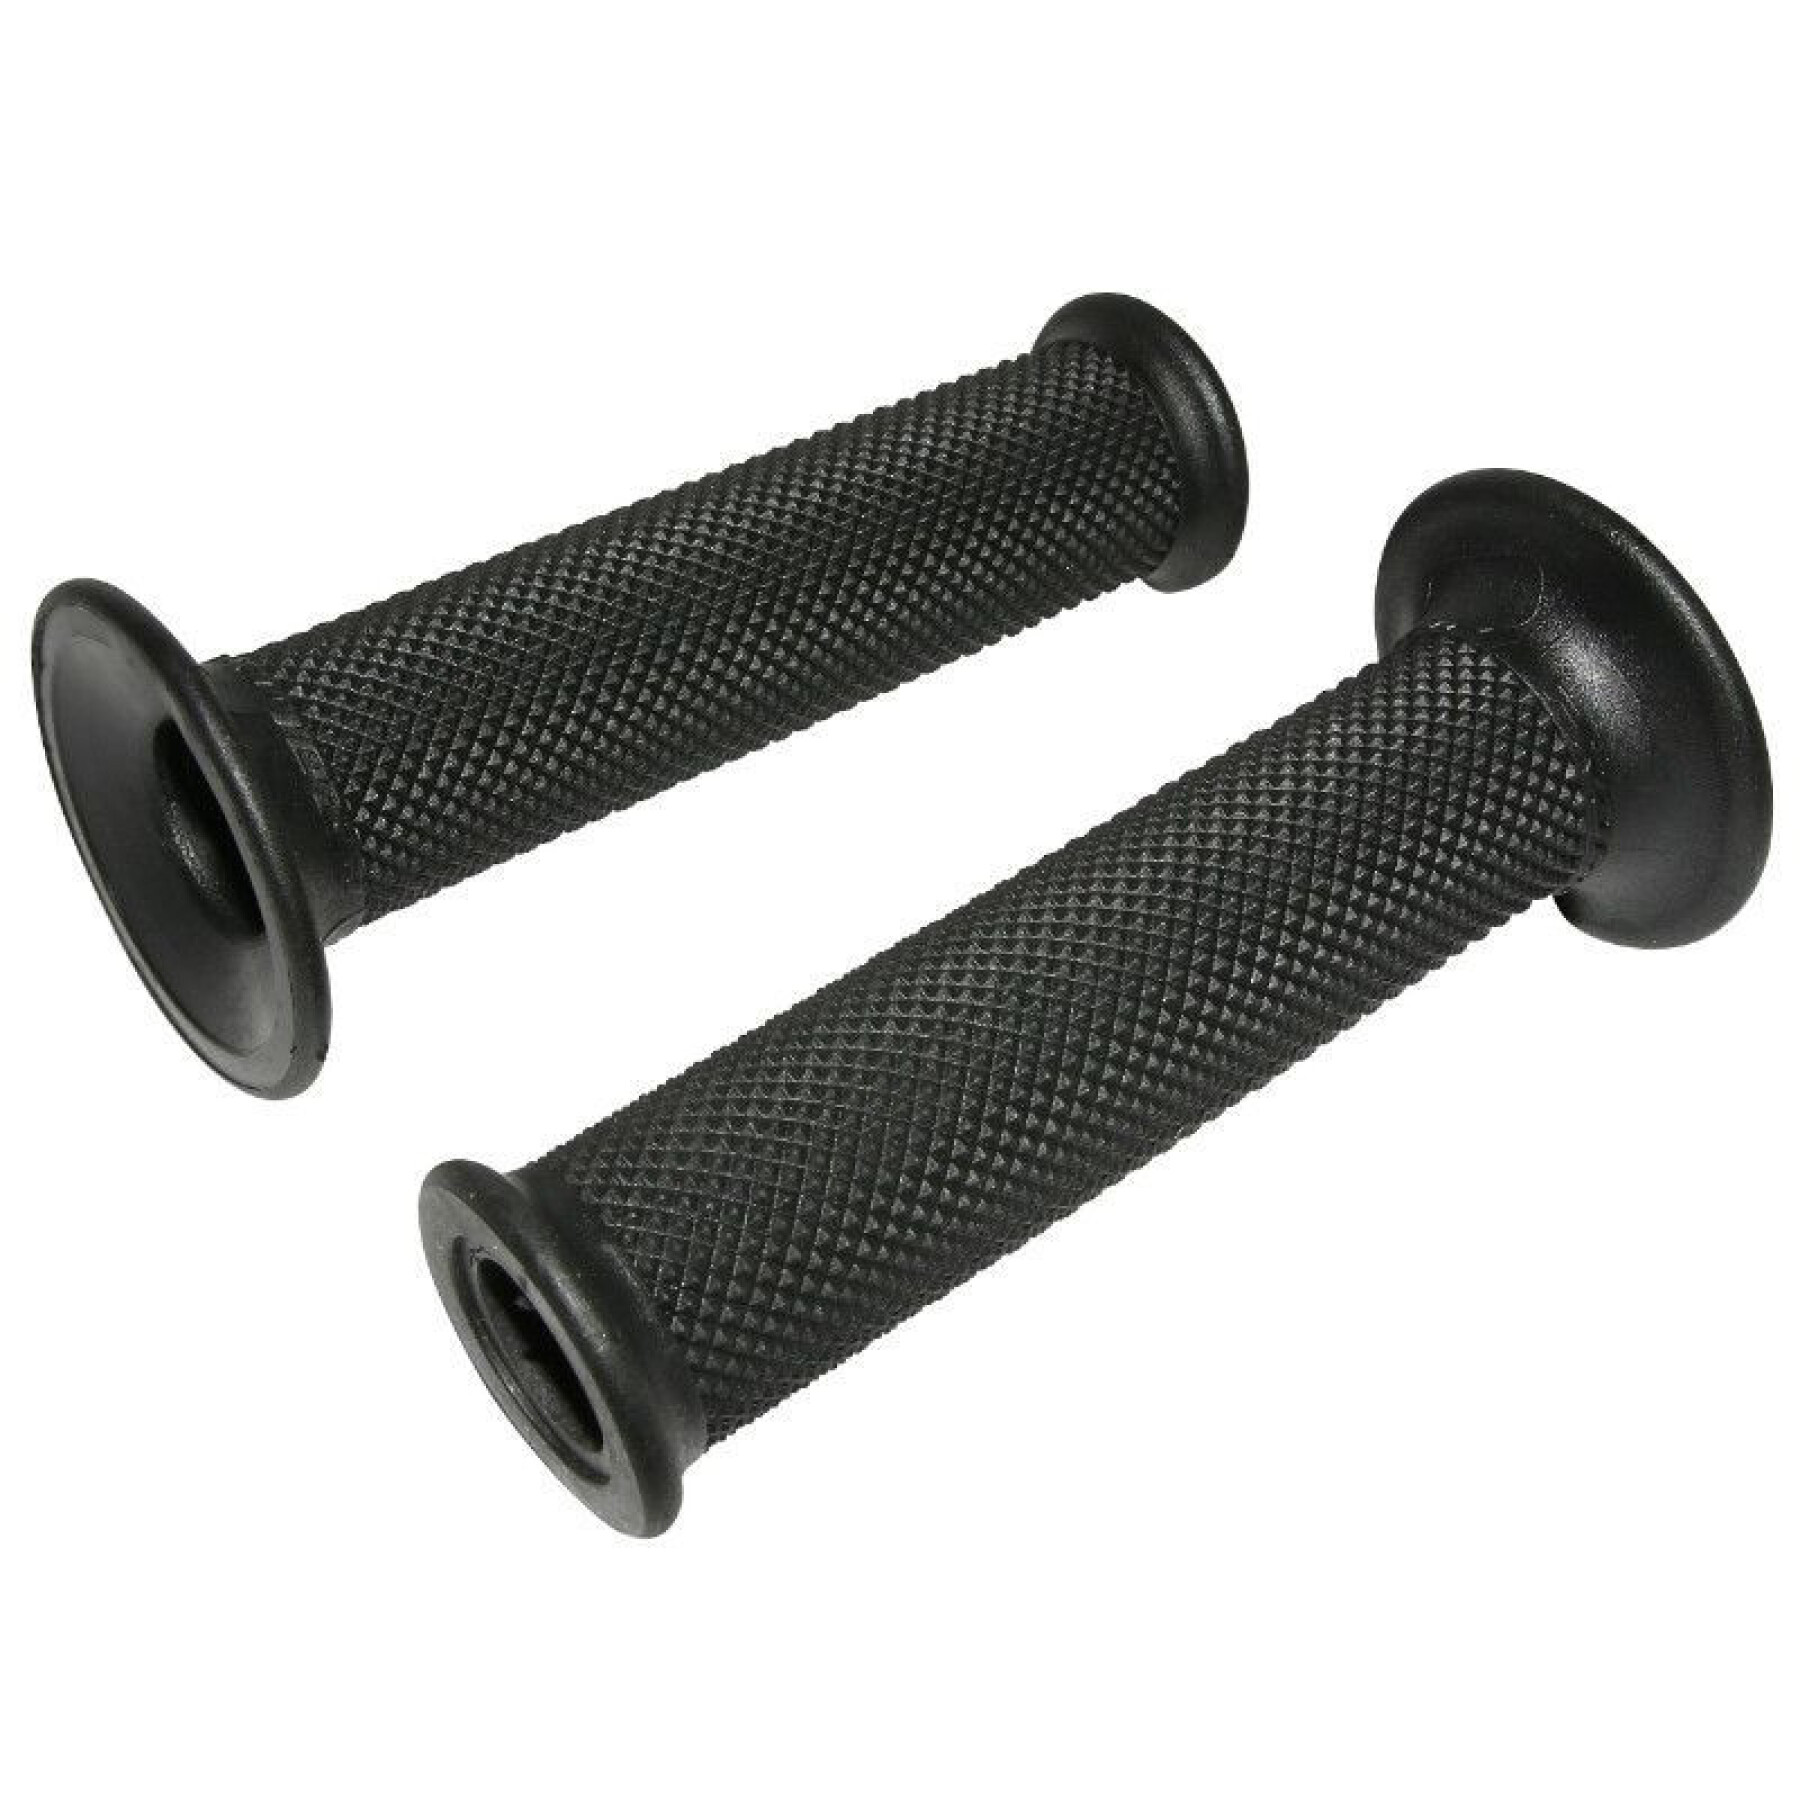 Pair of single-density handle covers Progrip 780 open end